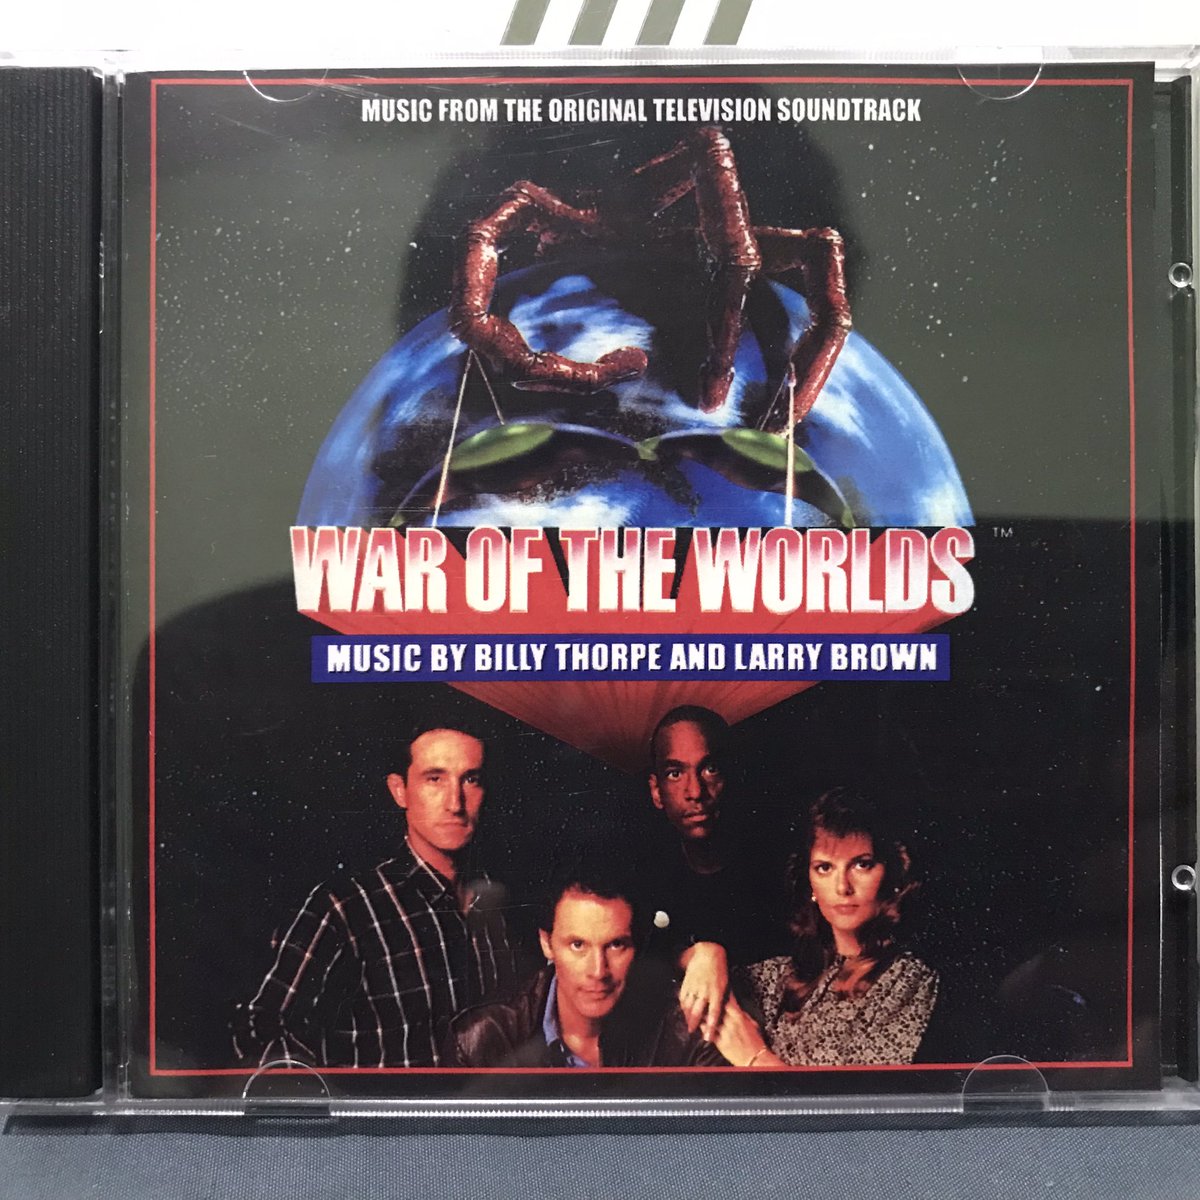 Now this was a cool find at an HPB in Dallas: a bootleg soundtrack CD for the 1988 WAR OF THE WORLDS tv series. I’ll never get over the 2nd season retooling that introduced pre-HIGHLANDER Adrian Paul and killed off its two minority characters Col. Ironhorse and Norton Drake.